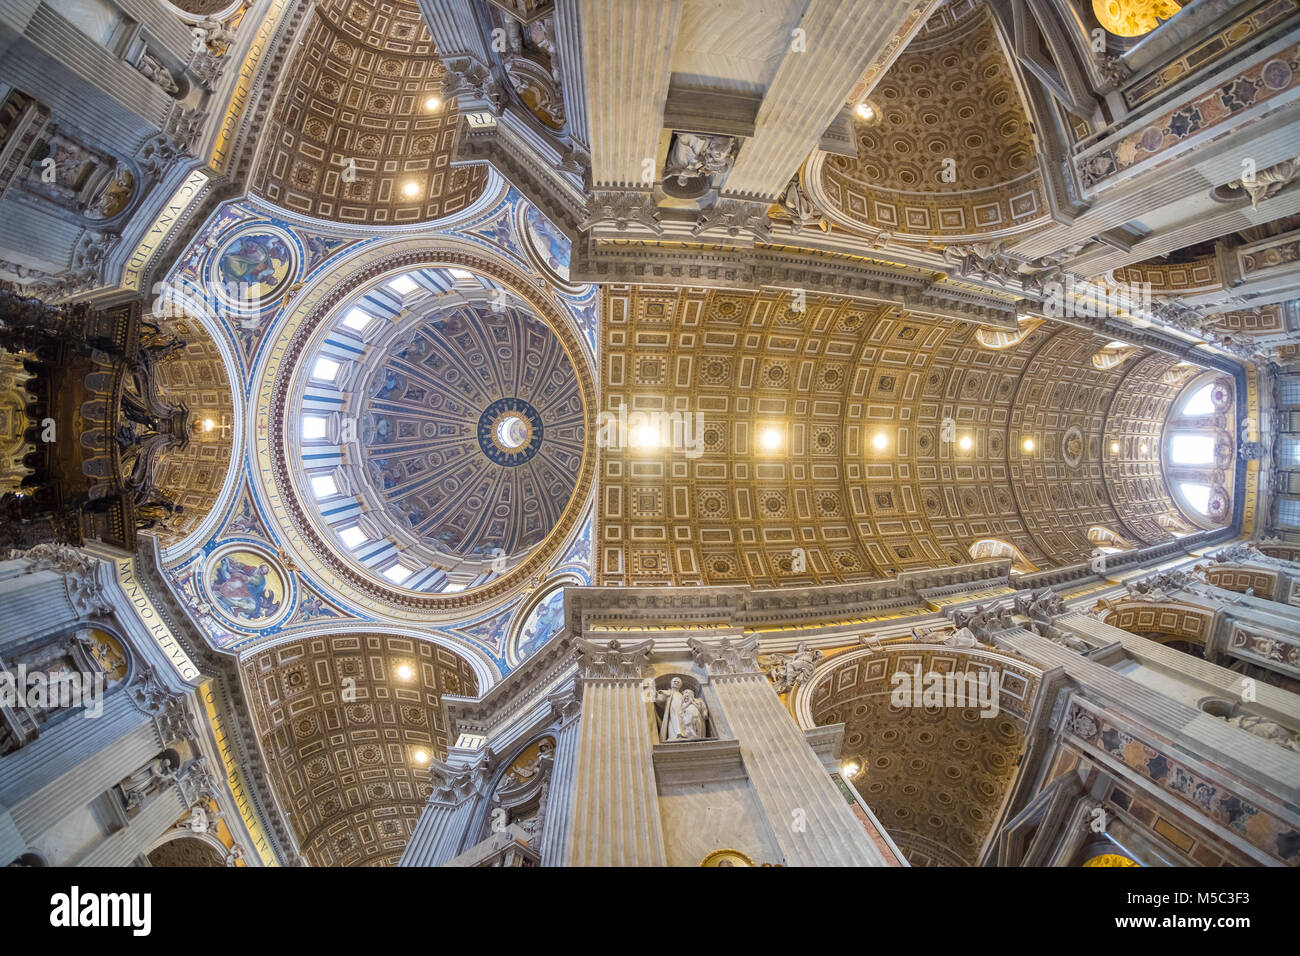 St. Peter's Basilica dome interior in Rome, Italy Stock Photo